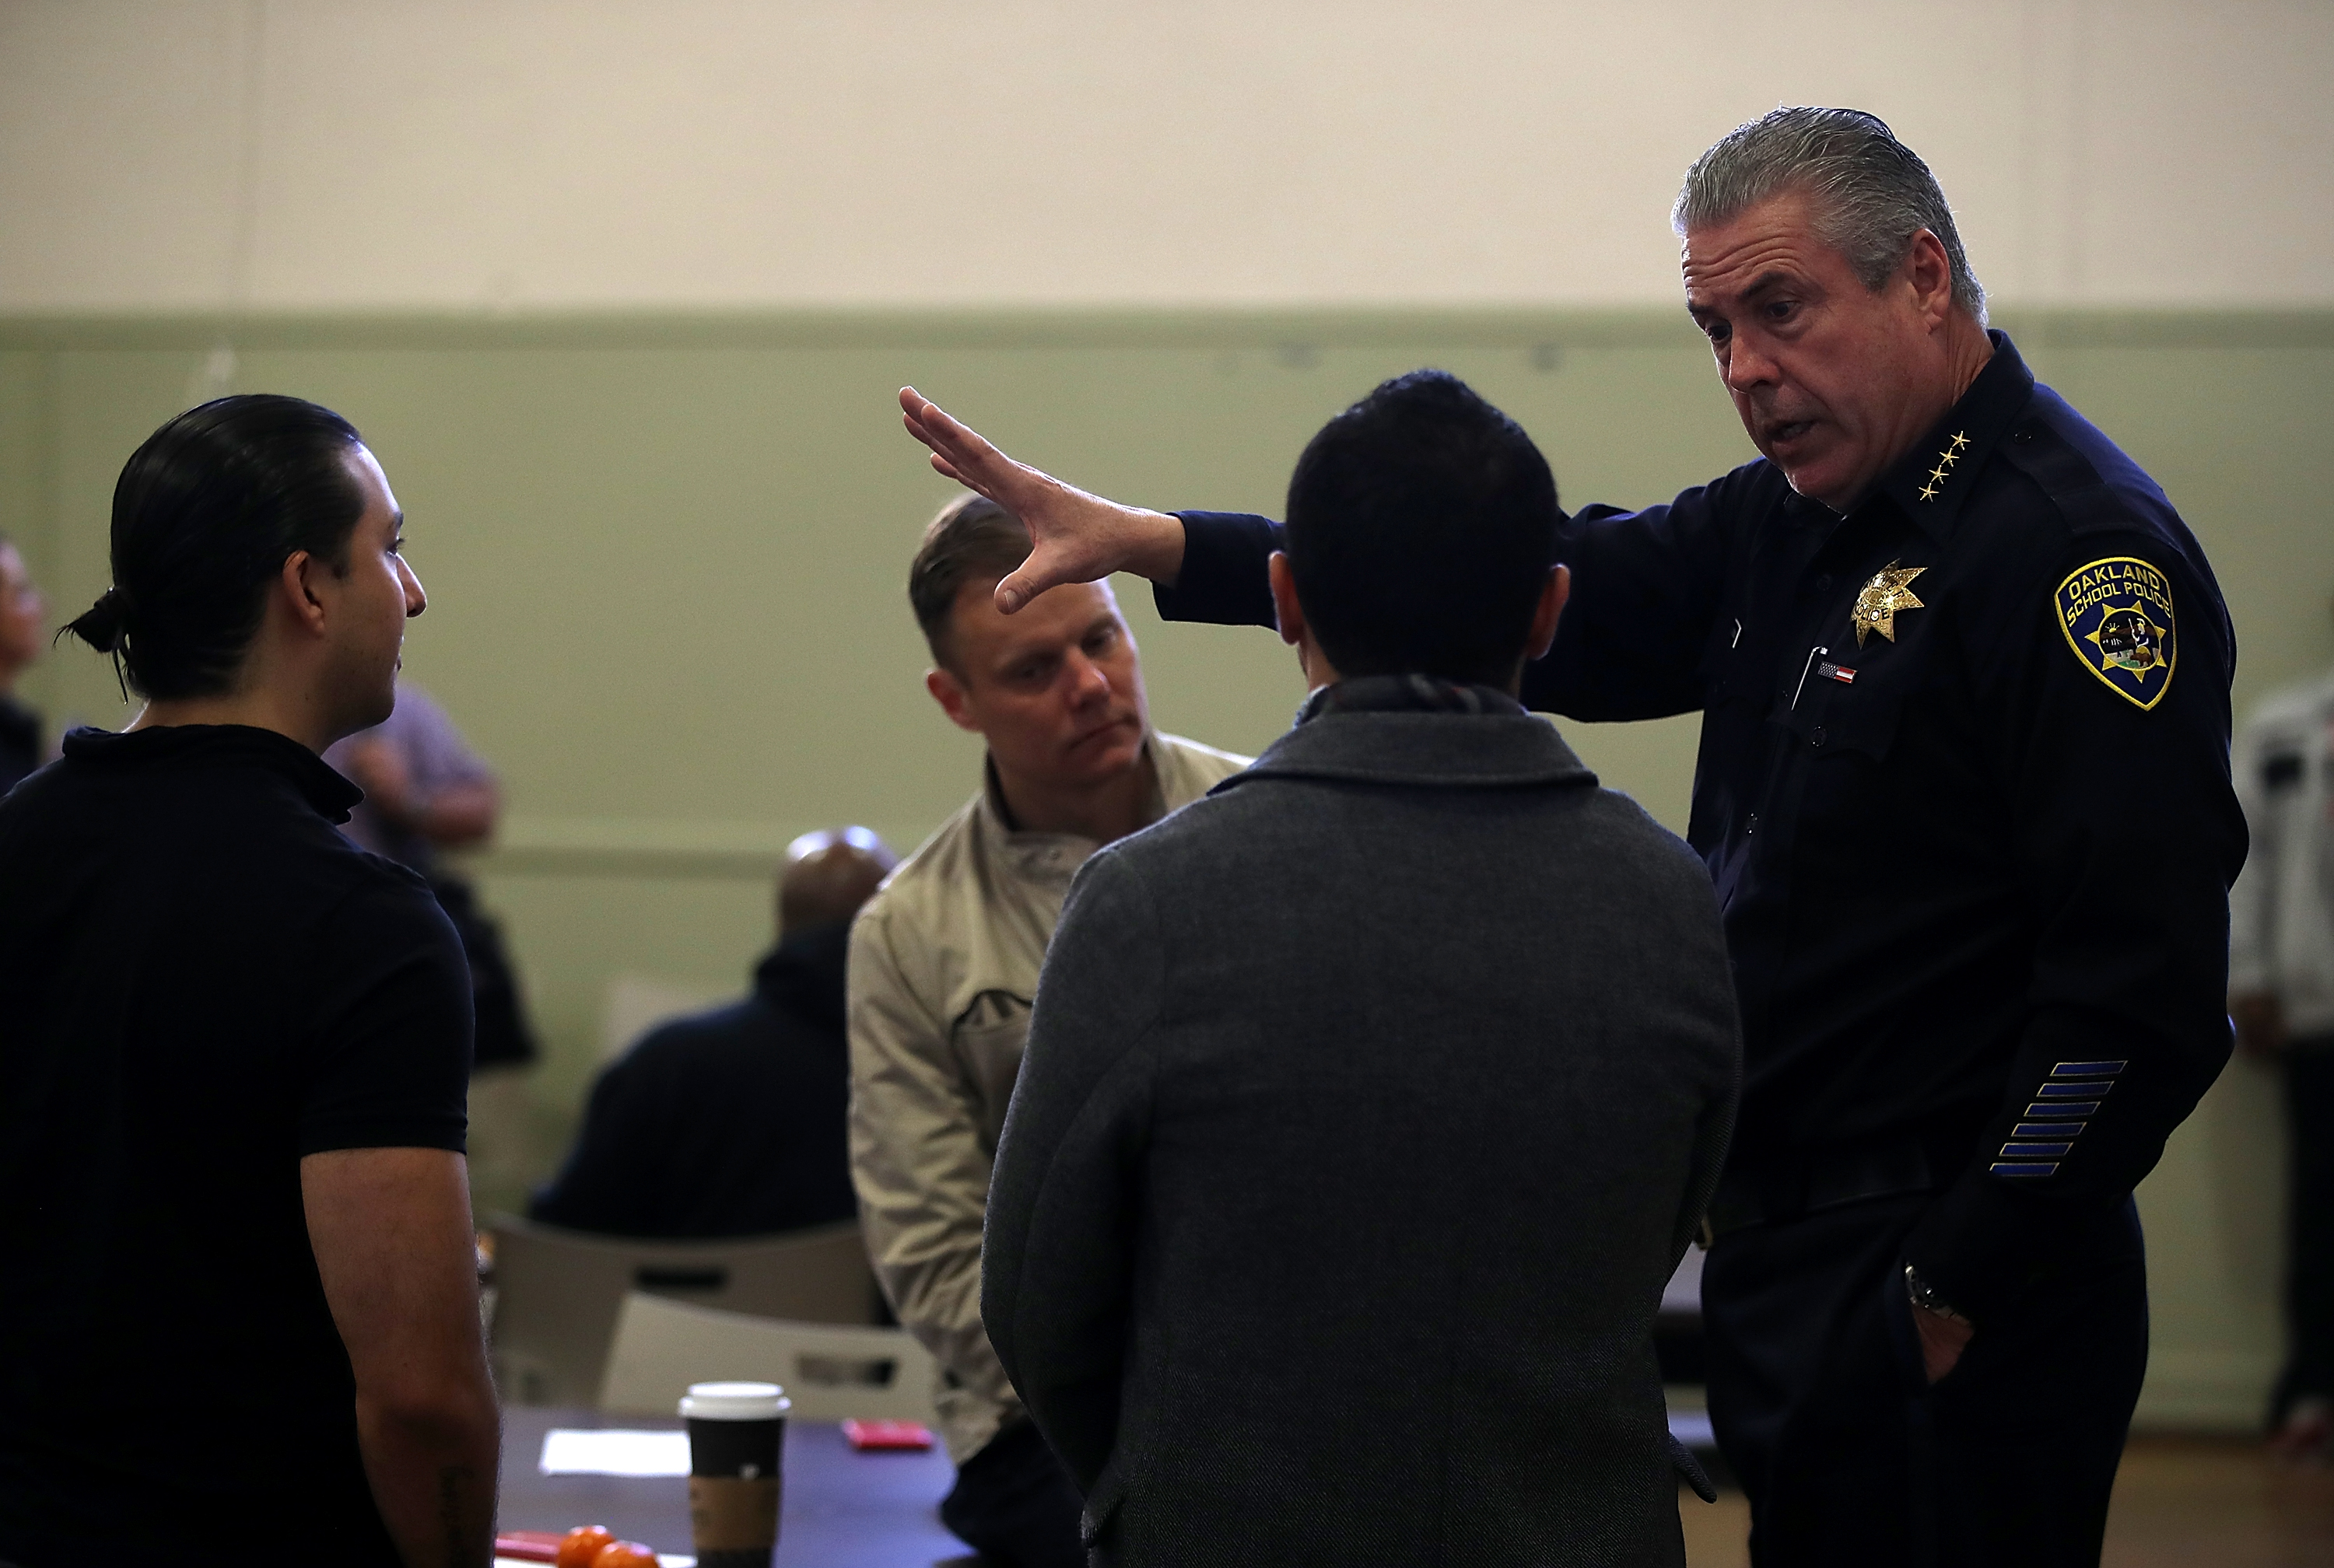 Oakland Schools Police chief Jeff Godown (R) speaks to school staff during an active shooter training session on Feb. 16, 2018 in Oakland, Calif. Godown supported the school district's decision to disband the police force, even though it could end his job. (Justin Sullivan—Getty Images)